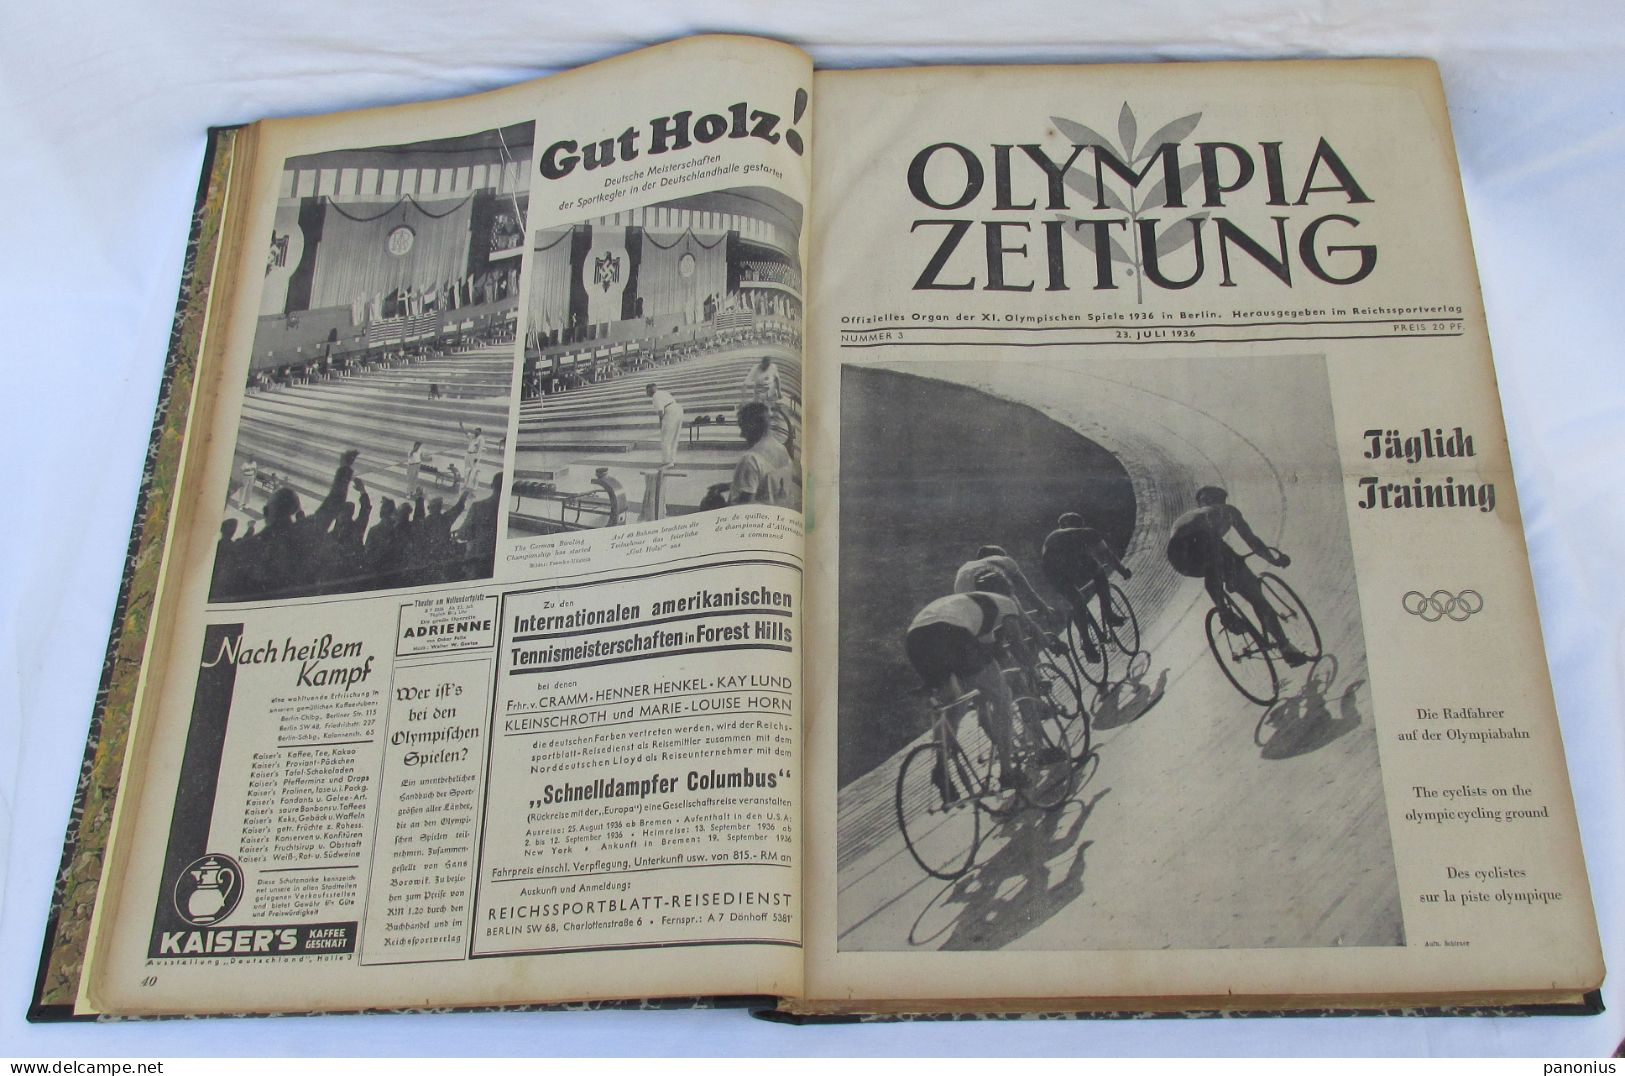 OLYMPIA ZEITUNG NEWSPAPER OLYMPIC GAMES BERLIN GERMANY 1936 SET 30 NUMBERS!!! - Apparel, Souvenirs & Other